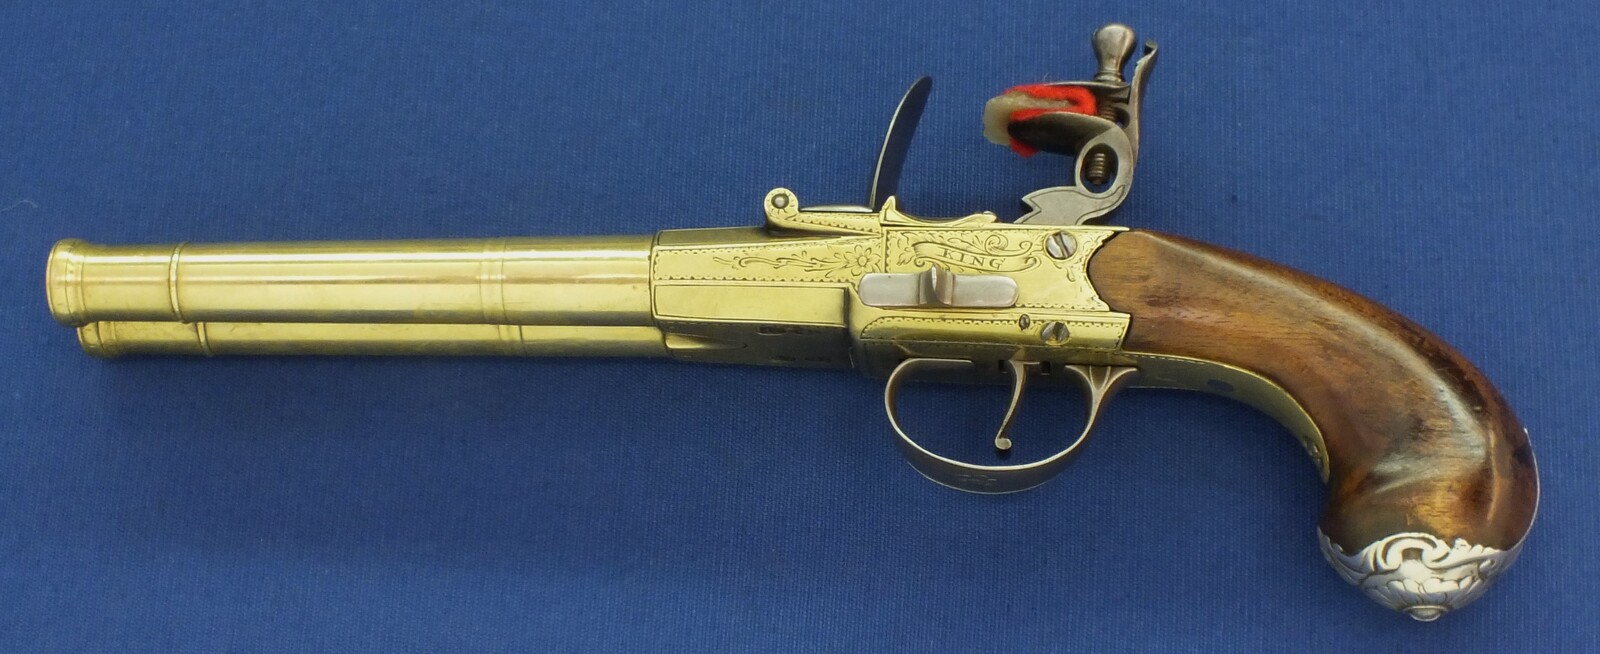 An antique English 18th Century circa 1775 Brass Box-Lock double barreled Flintlock pistol with sliding cut-off lever and trigger-guard safety catch. Signed KING LONDON. Caliber 13mm. Length 29,5cm. In very good condition. Price 1.850 euro.